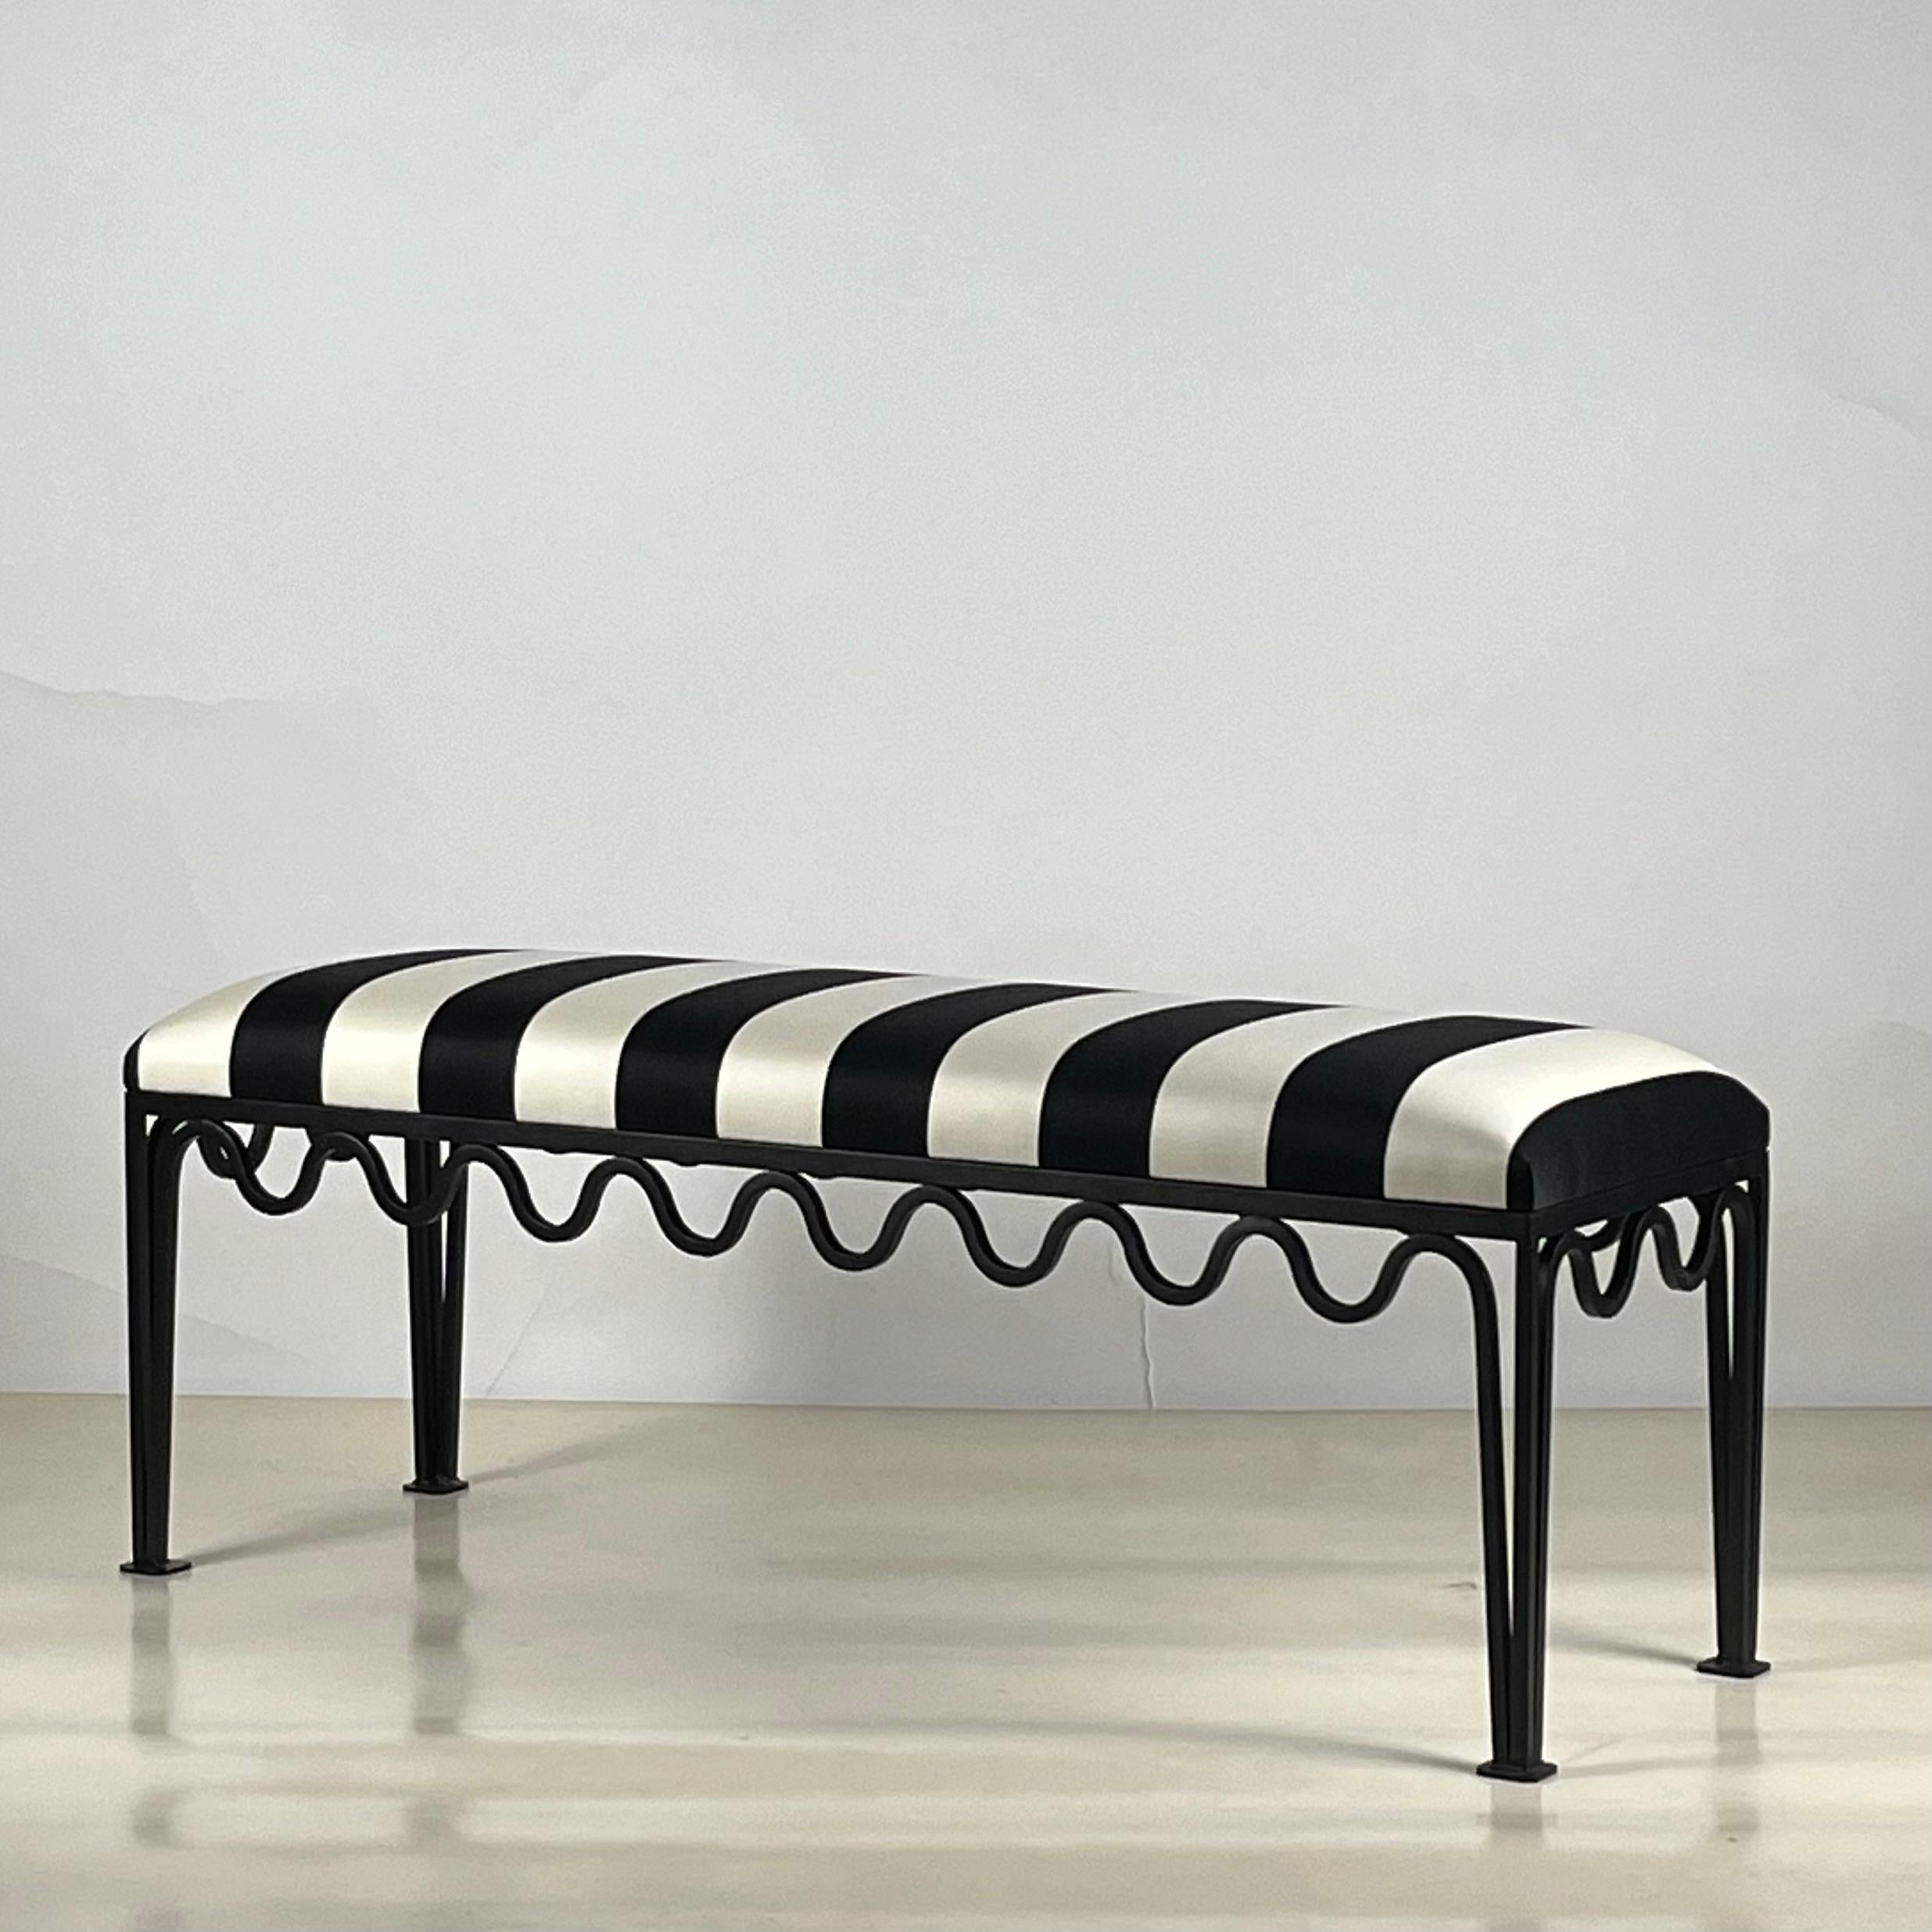 Powder-Coated Narrow 'Méandre' Bench by Design Frères, in COM For Sale